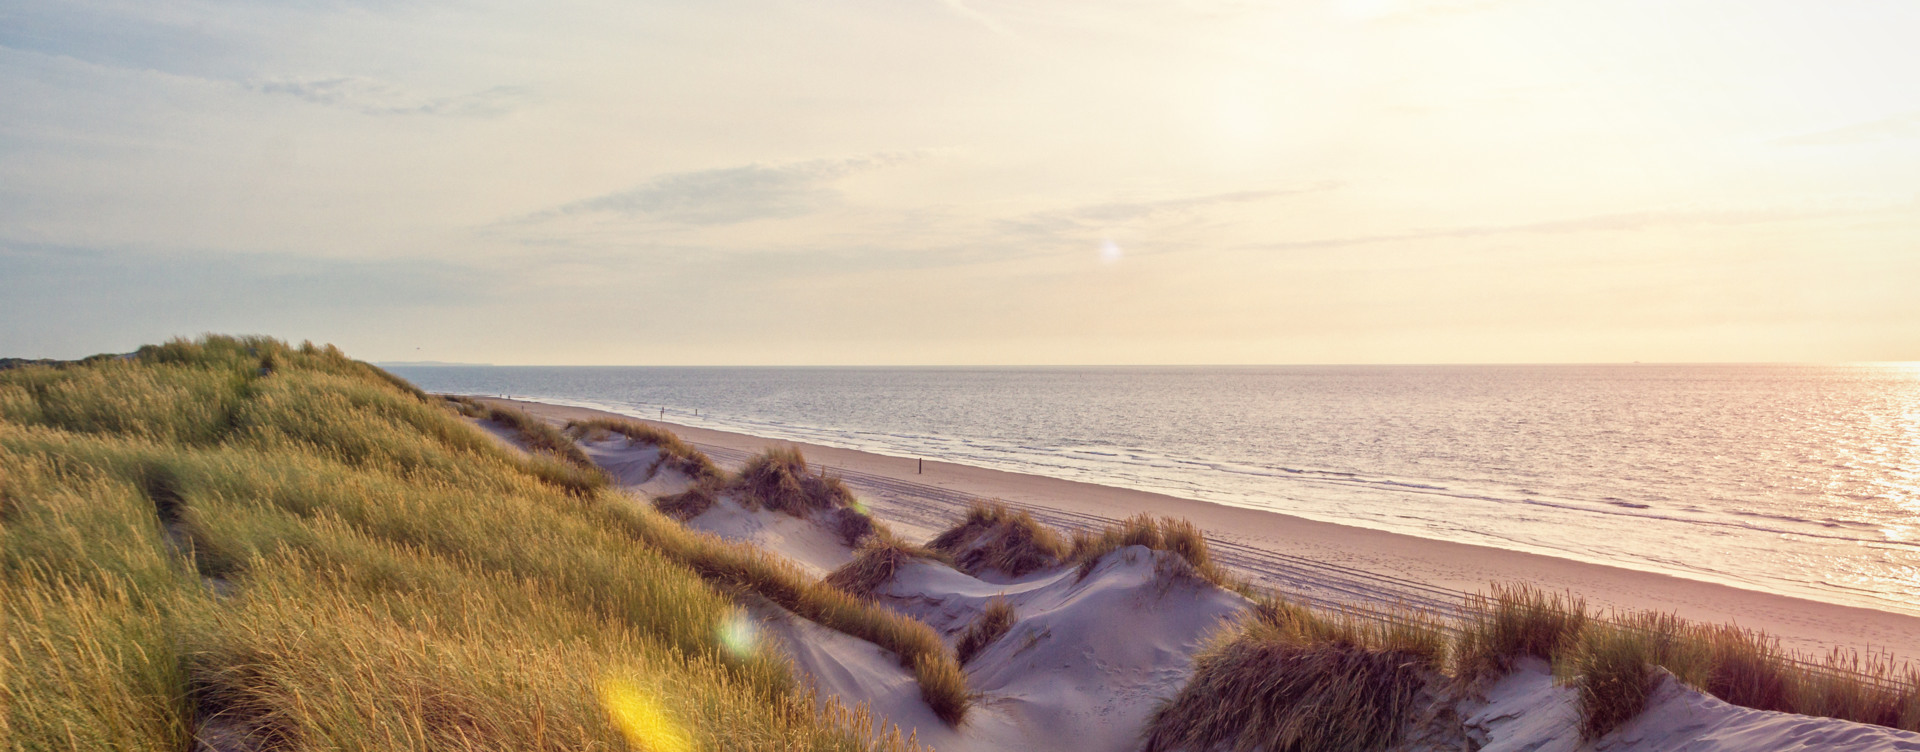 Make your holiday on the Zeeland coast an unforgettable one
with the best day trips